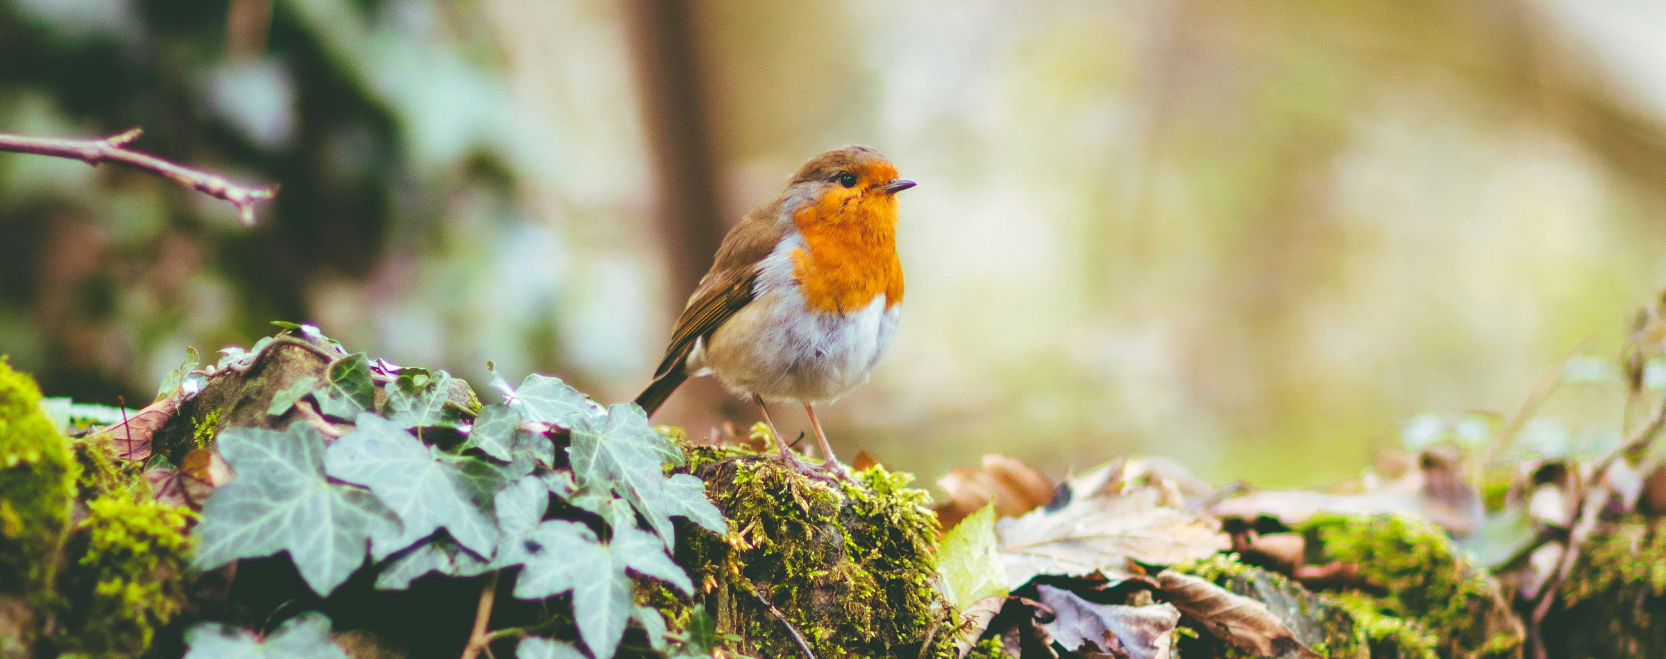 Robin in a forest